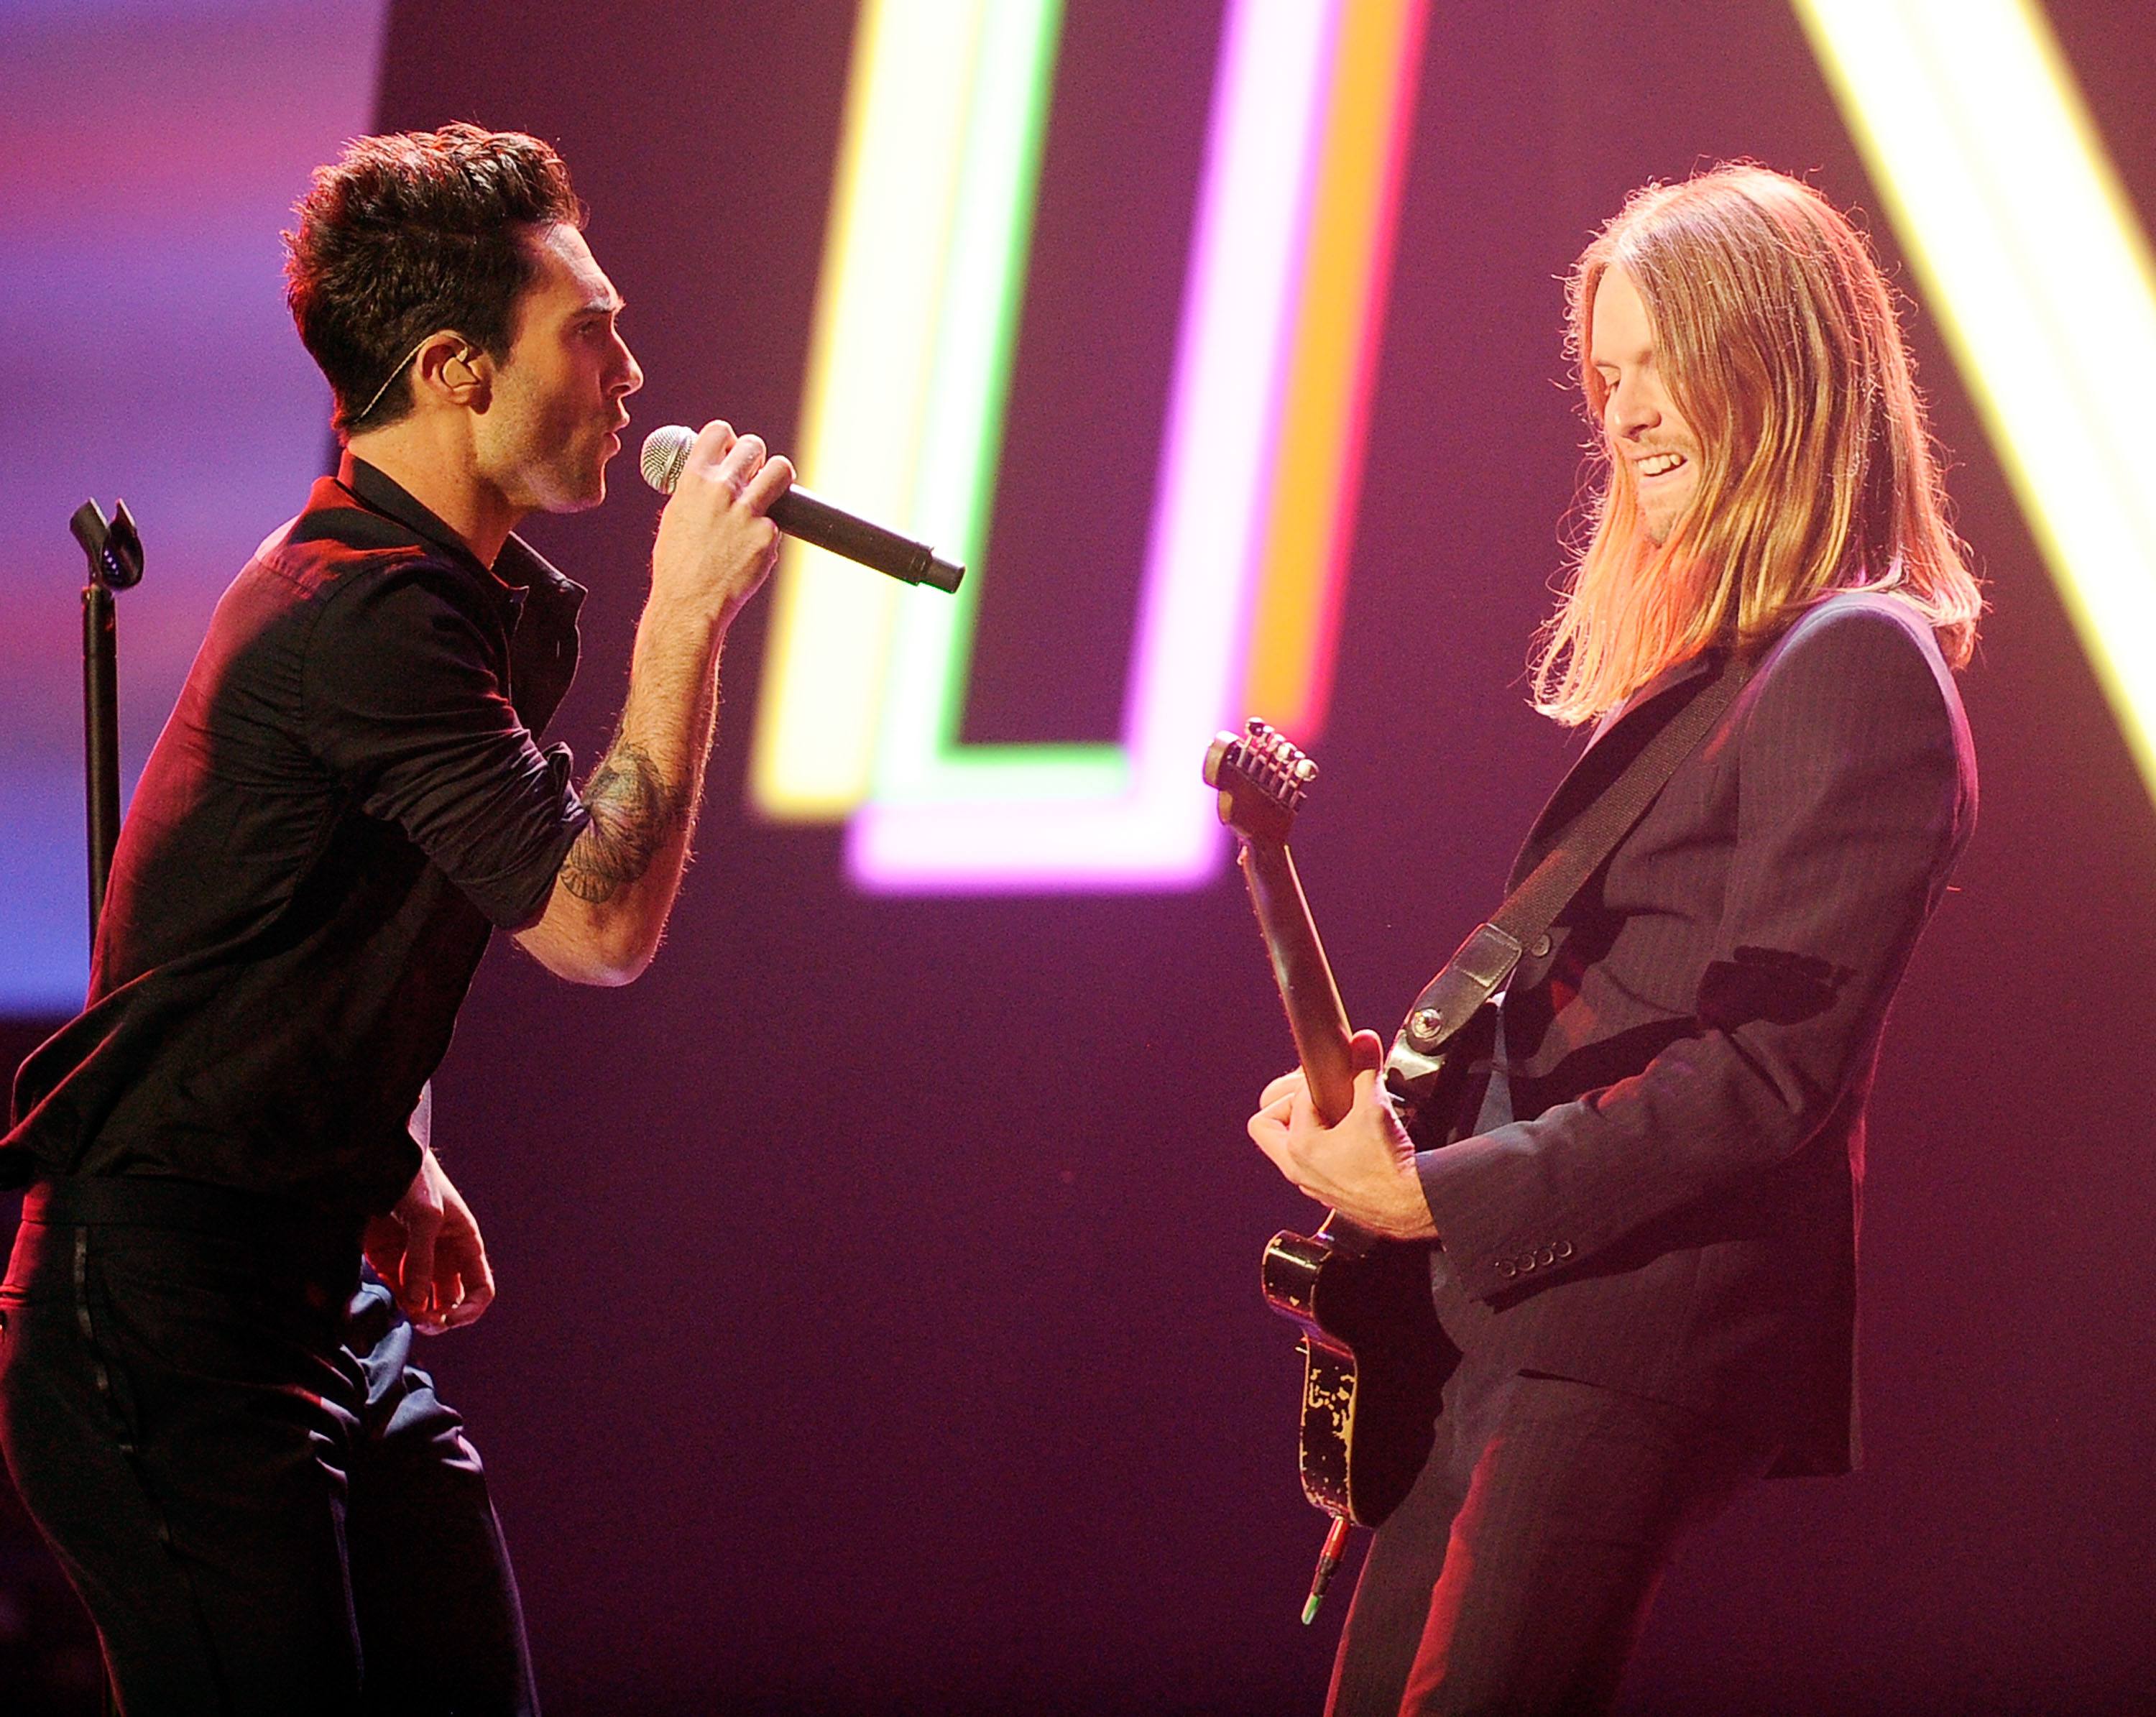 Adam Levine and James Valentine of Maroon 5 perform onstage at the 2011 American Music Awards